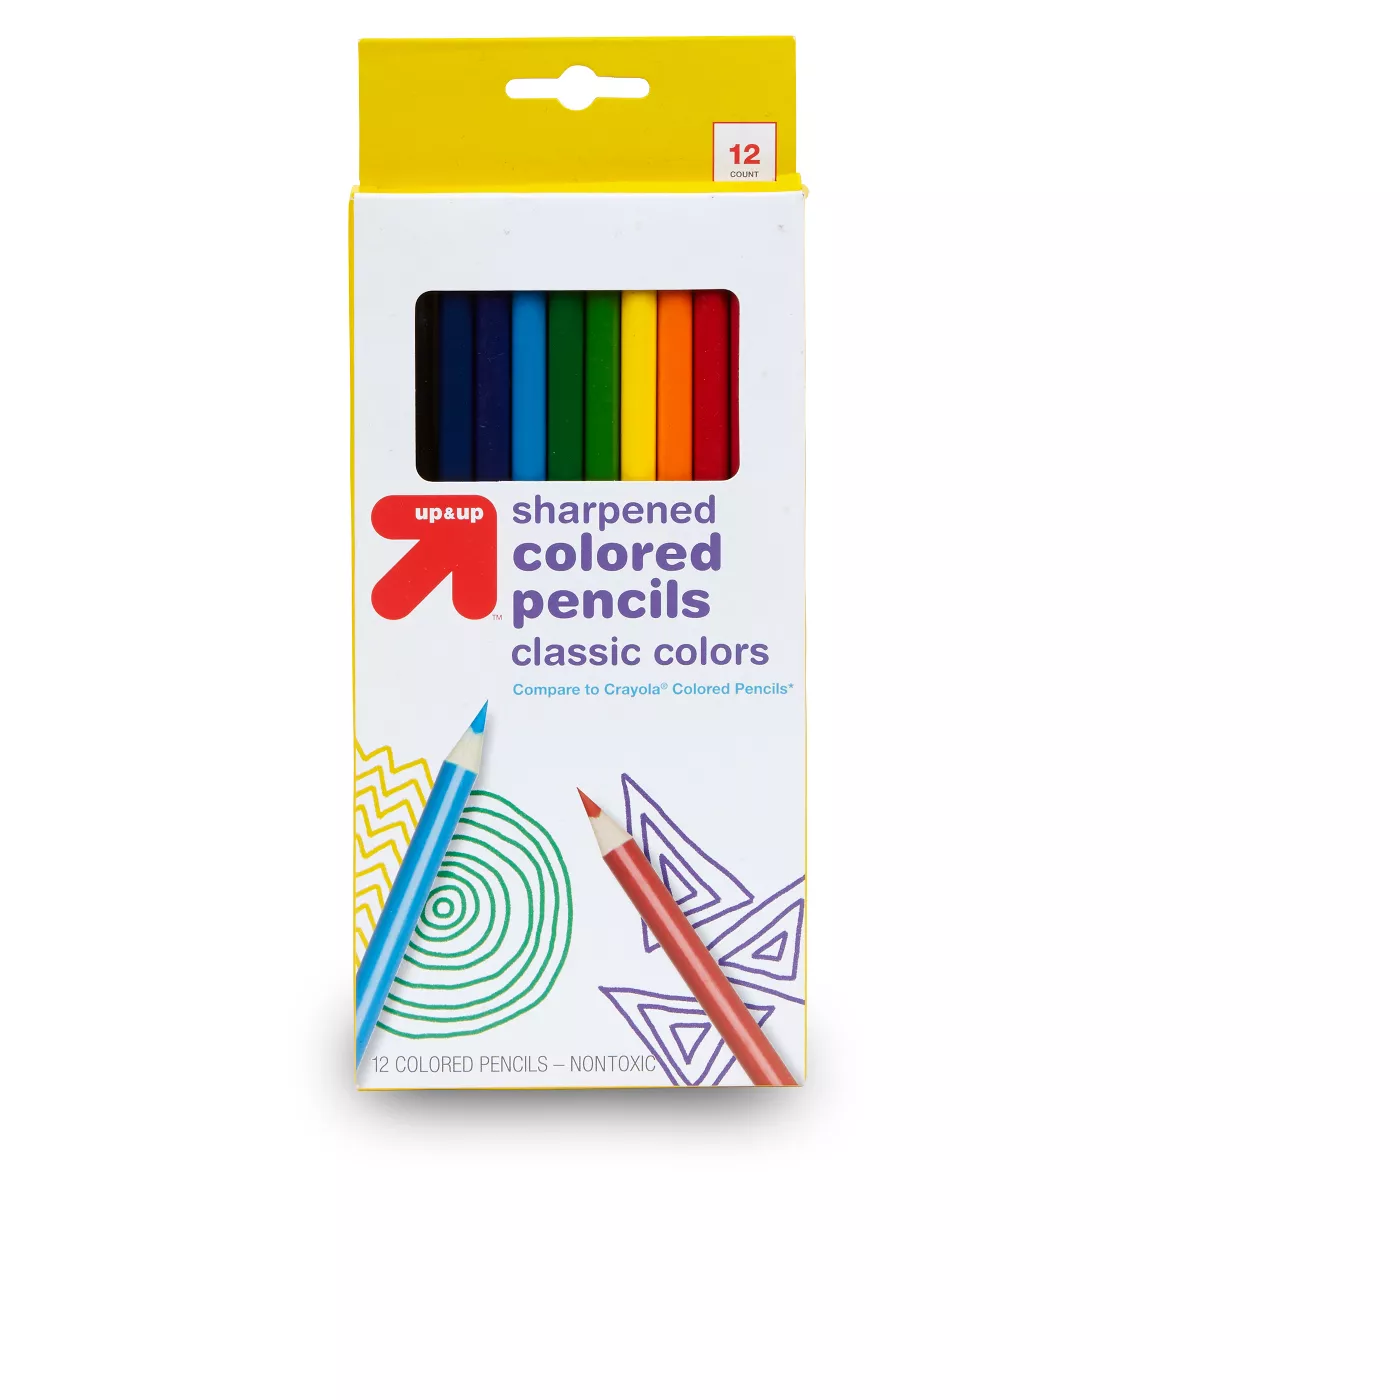 Sharpened Colored Pencils Classic Colors - Up&Up™ - image 1 of 6